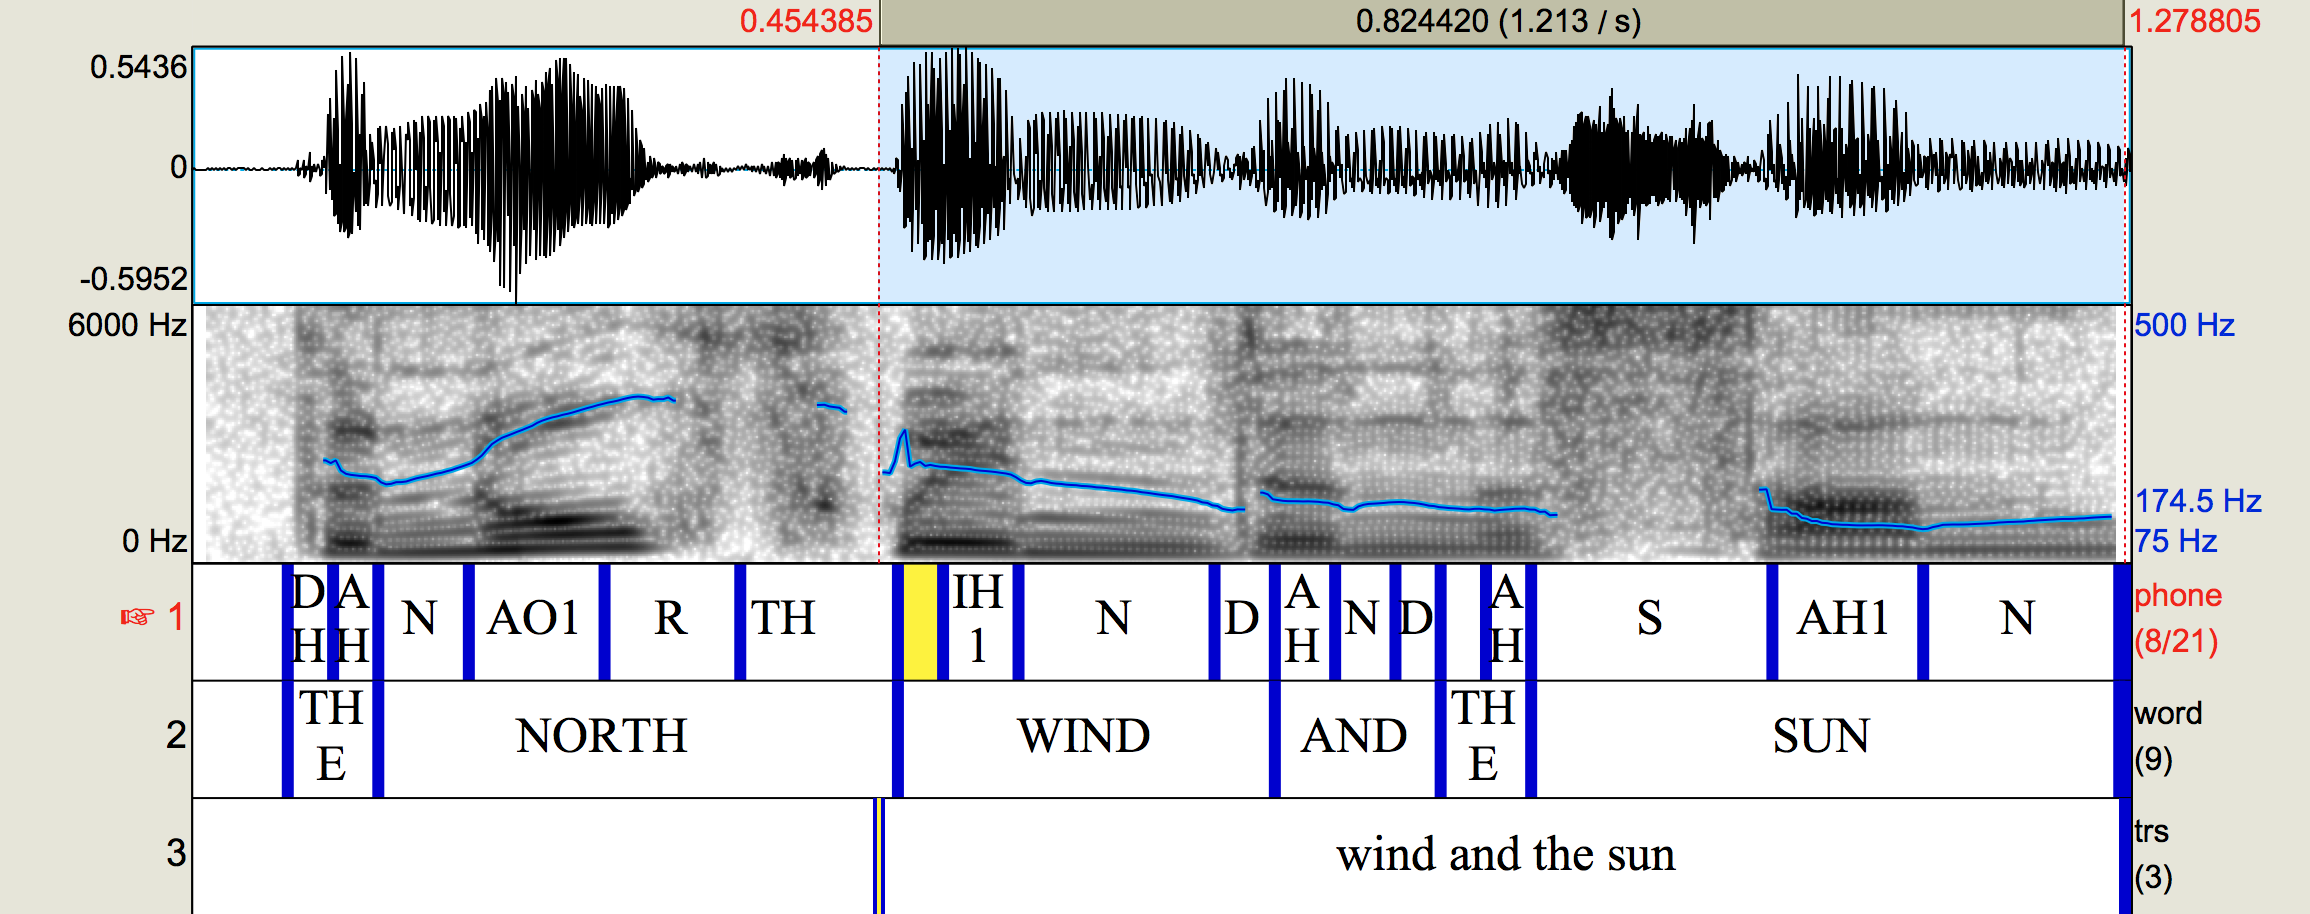 Audio of 'the north wind and the sun' after realignment